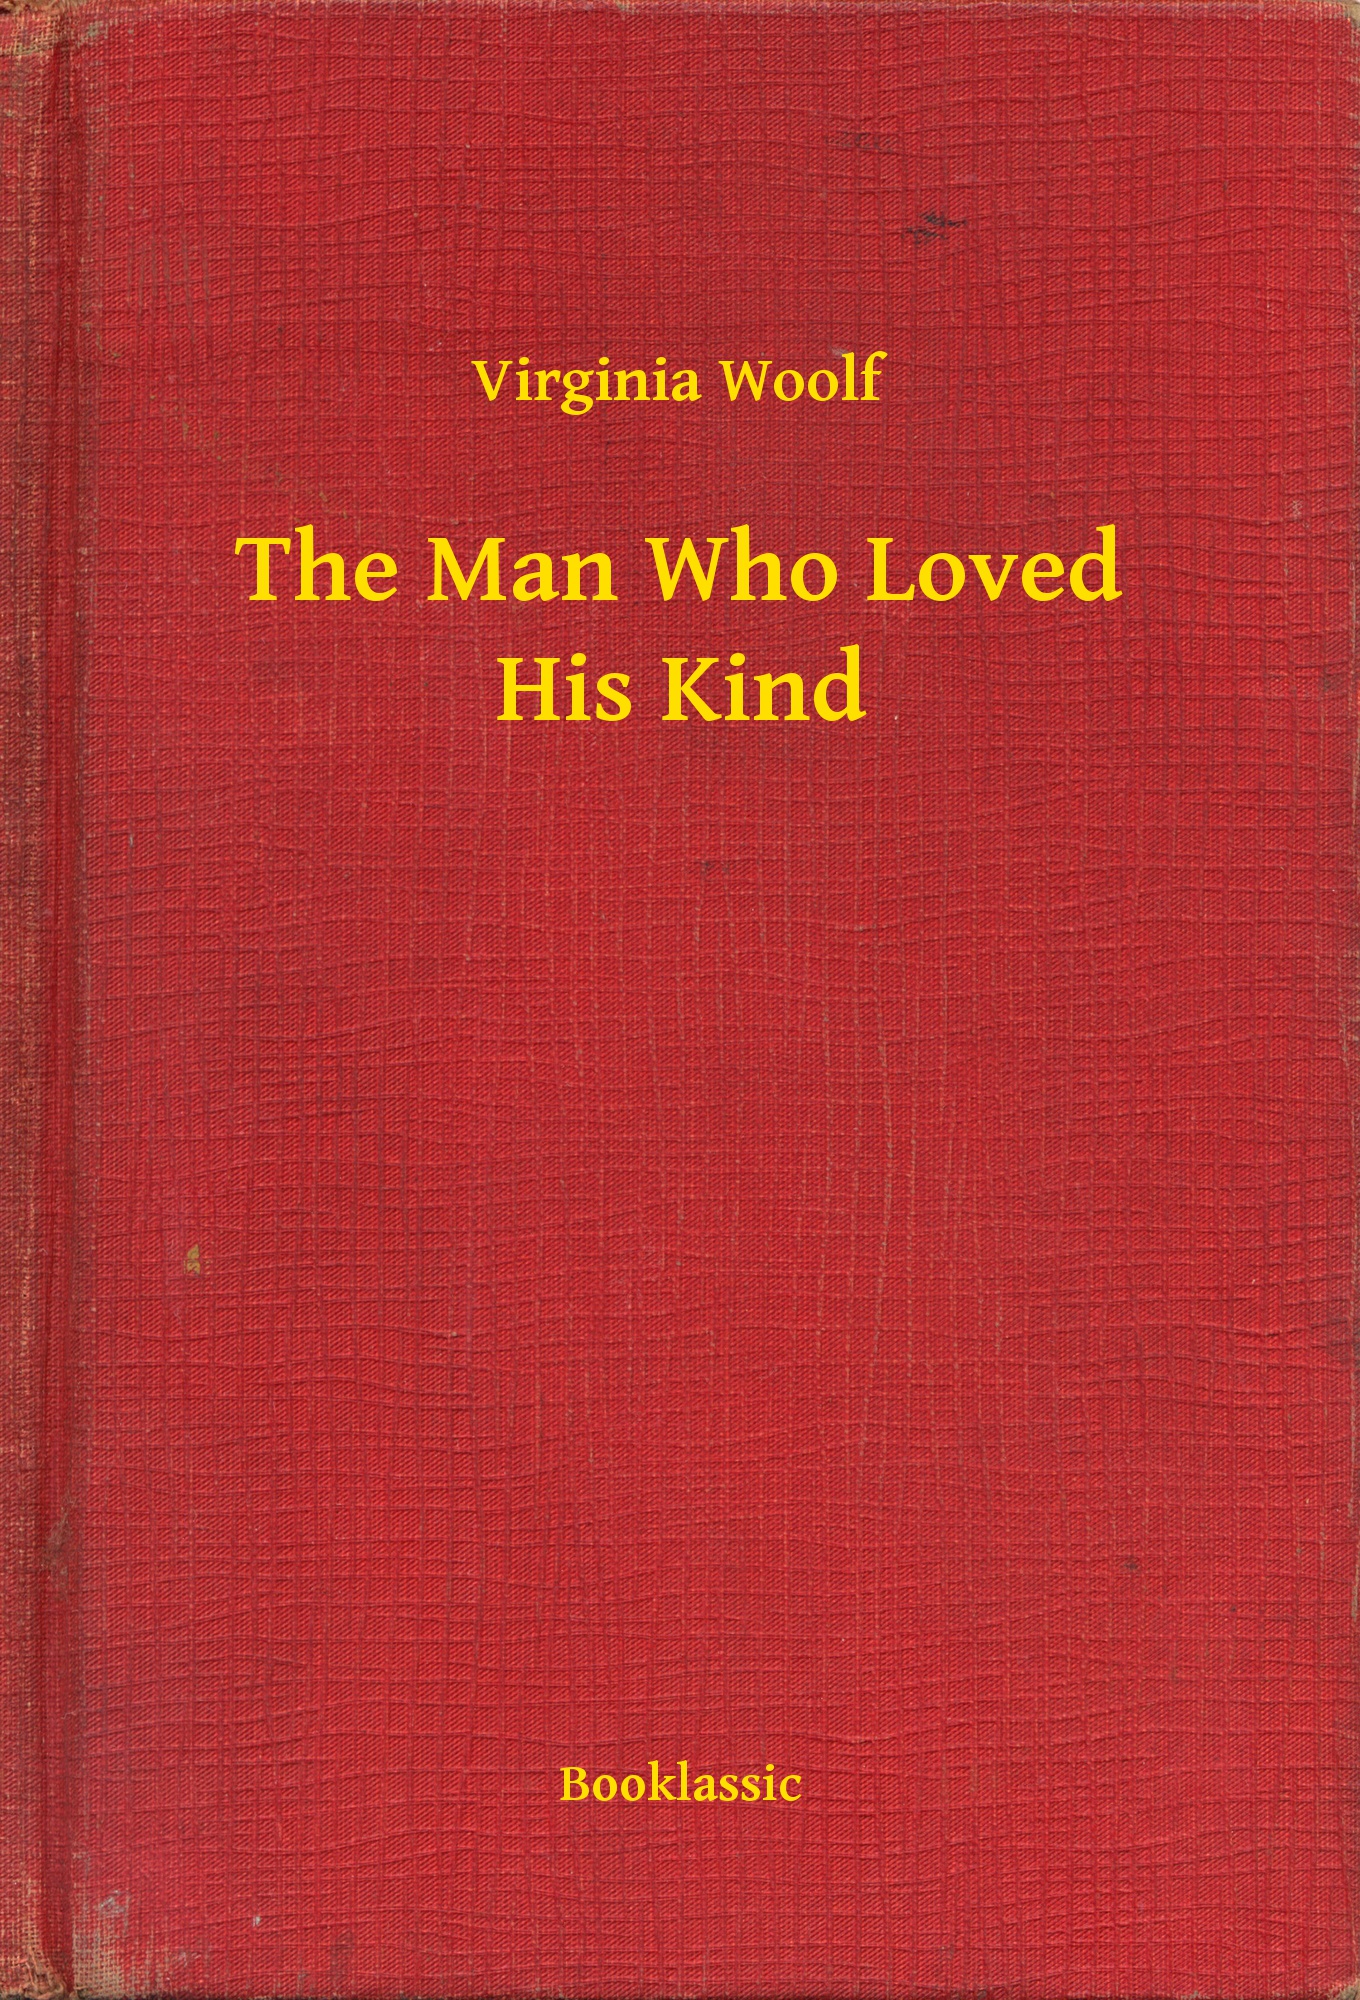 The Man Who Loved His Kind